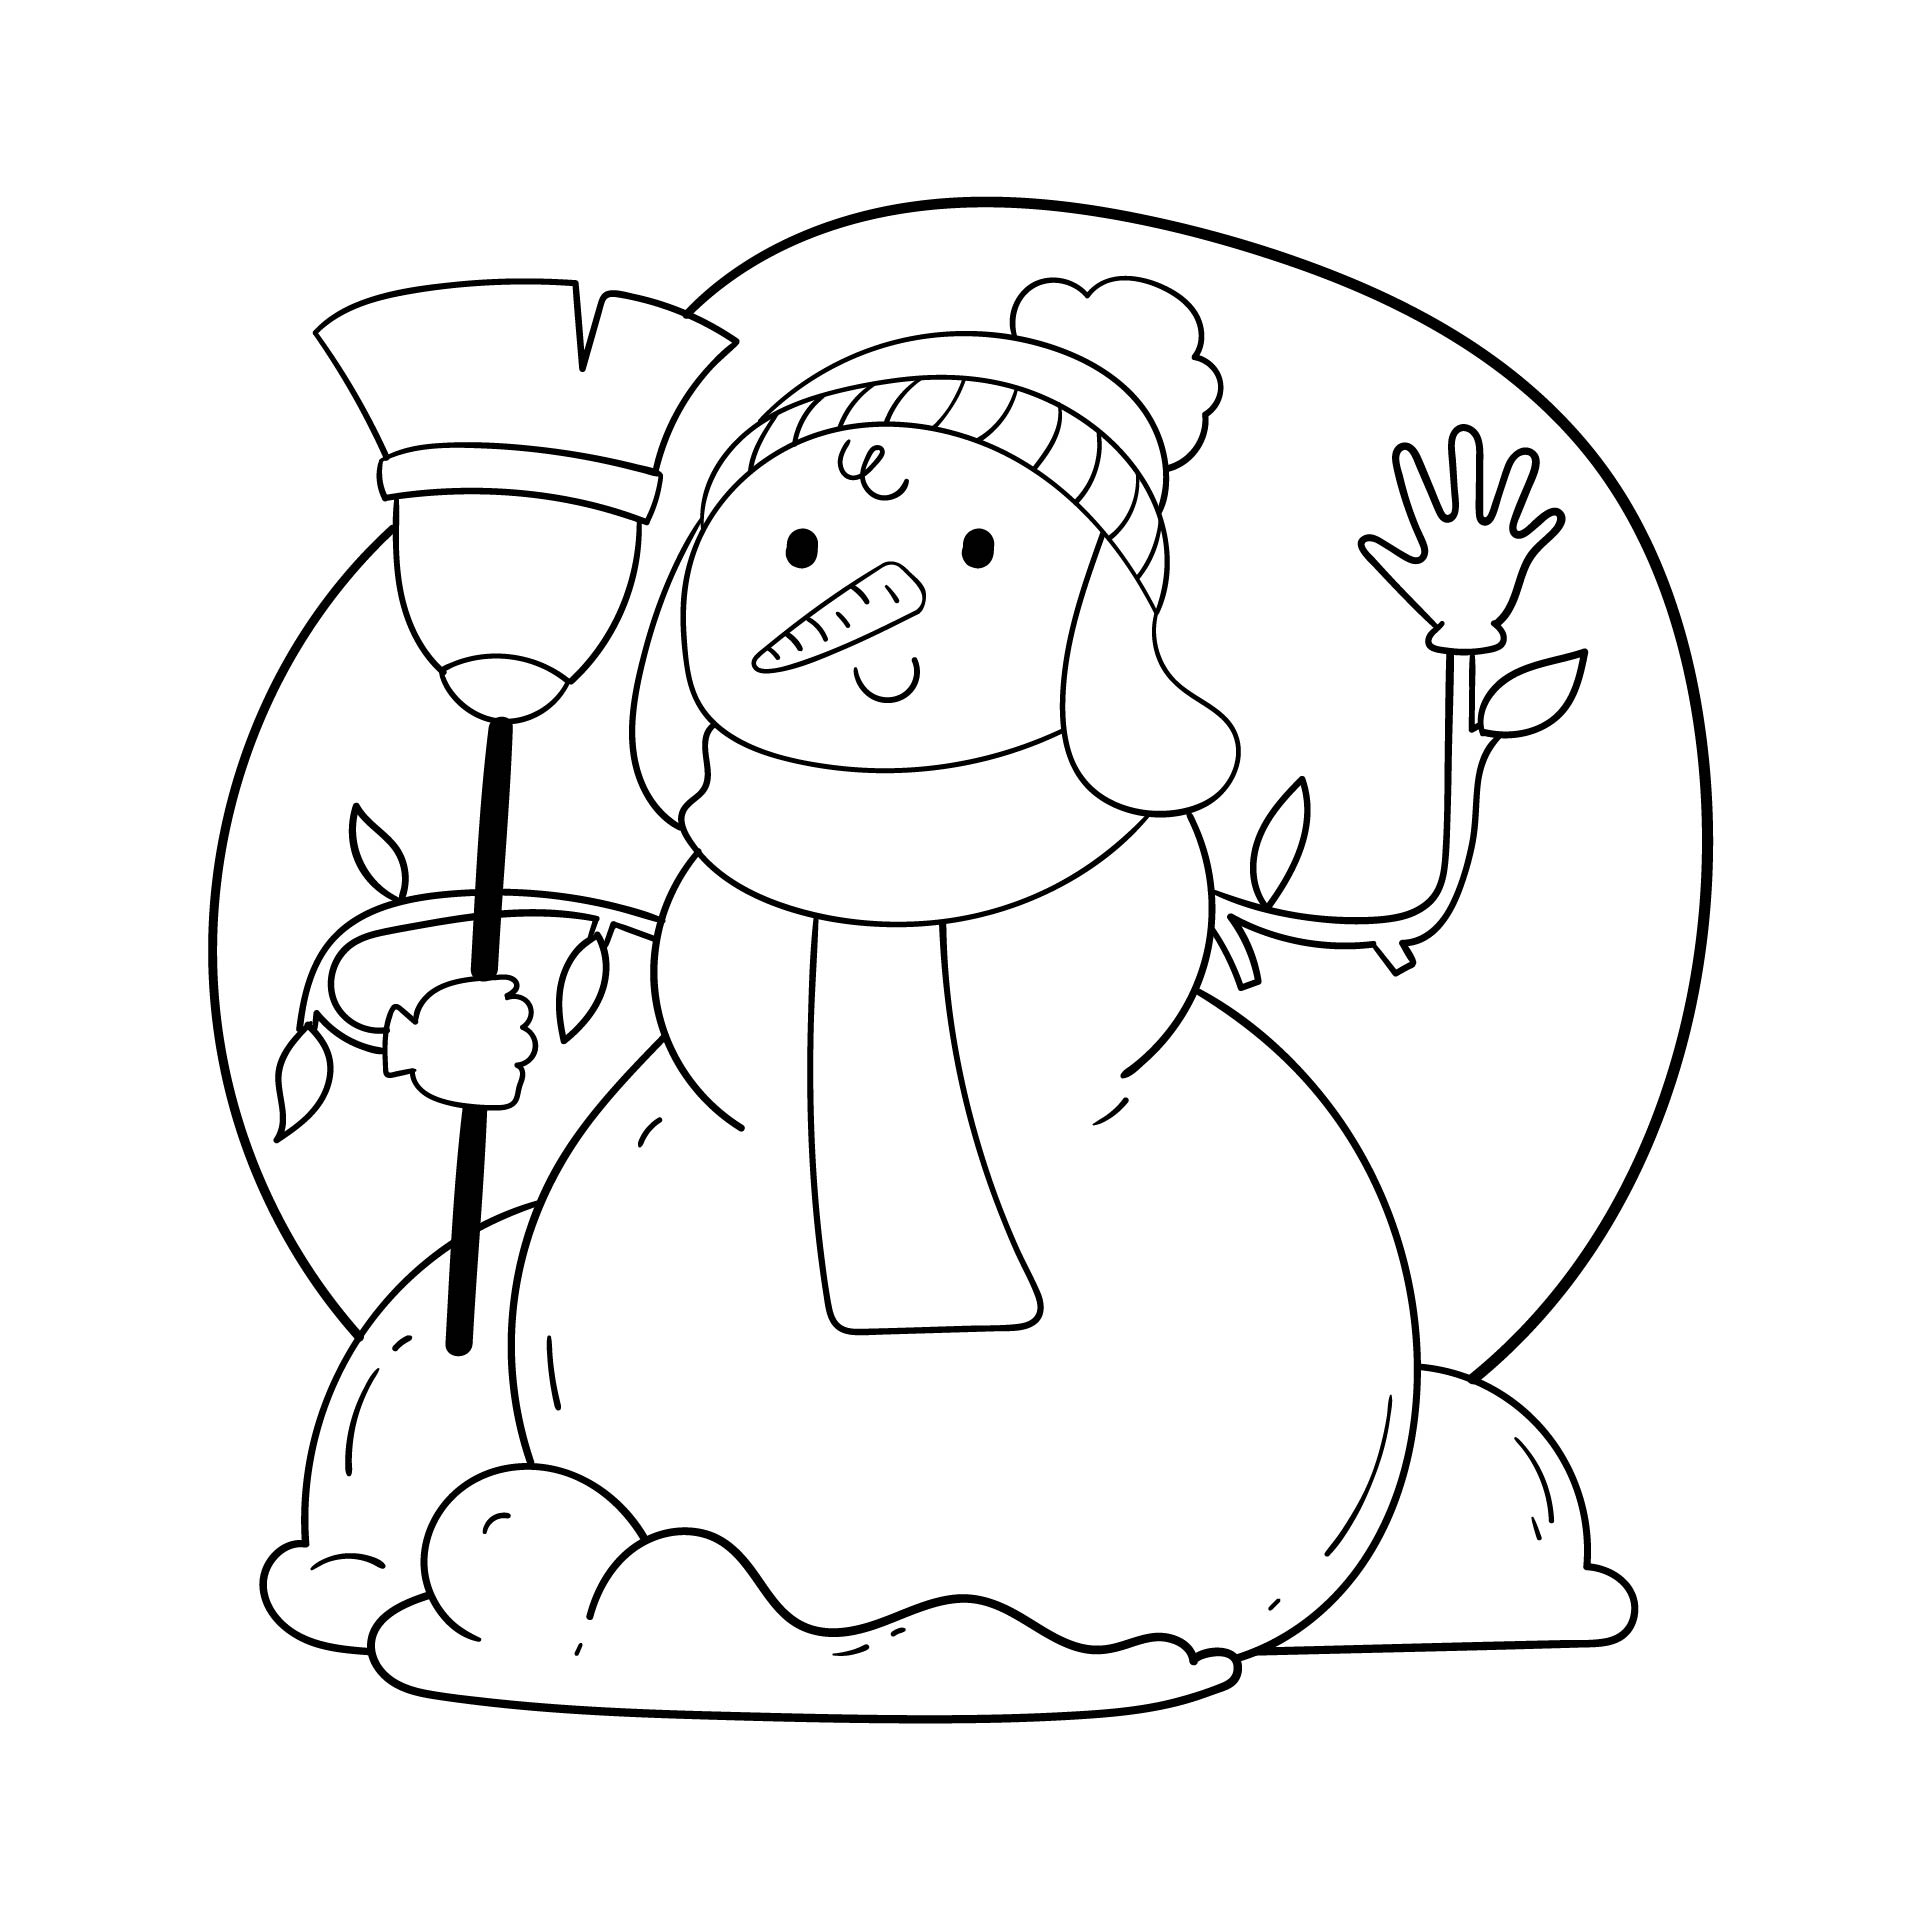 Printable Christmas Snowman Coloring Pages